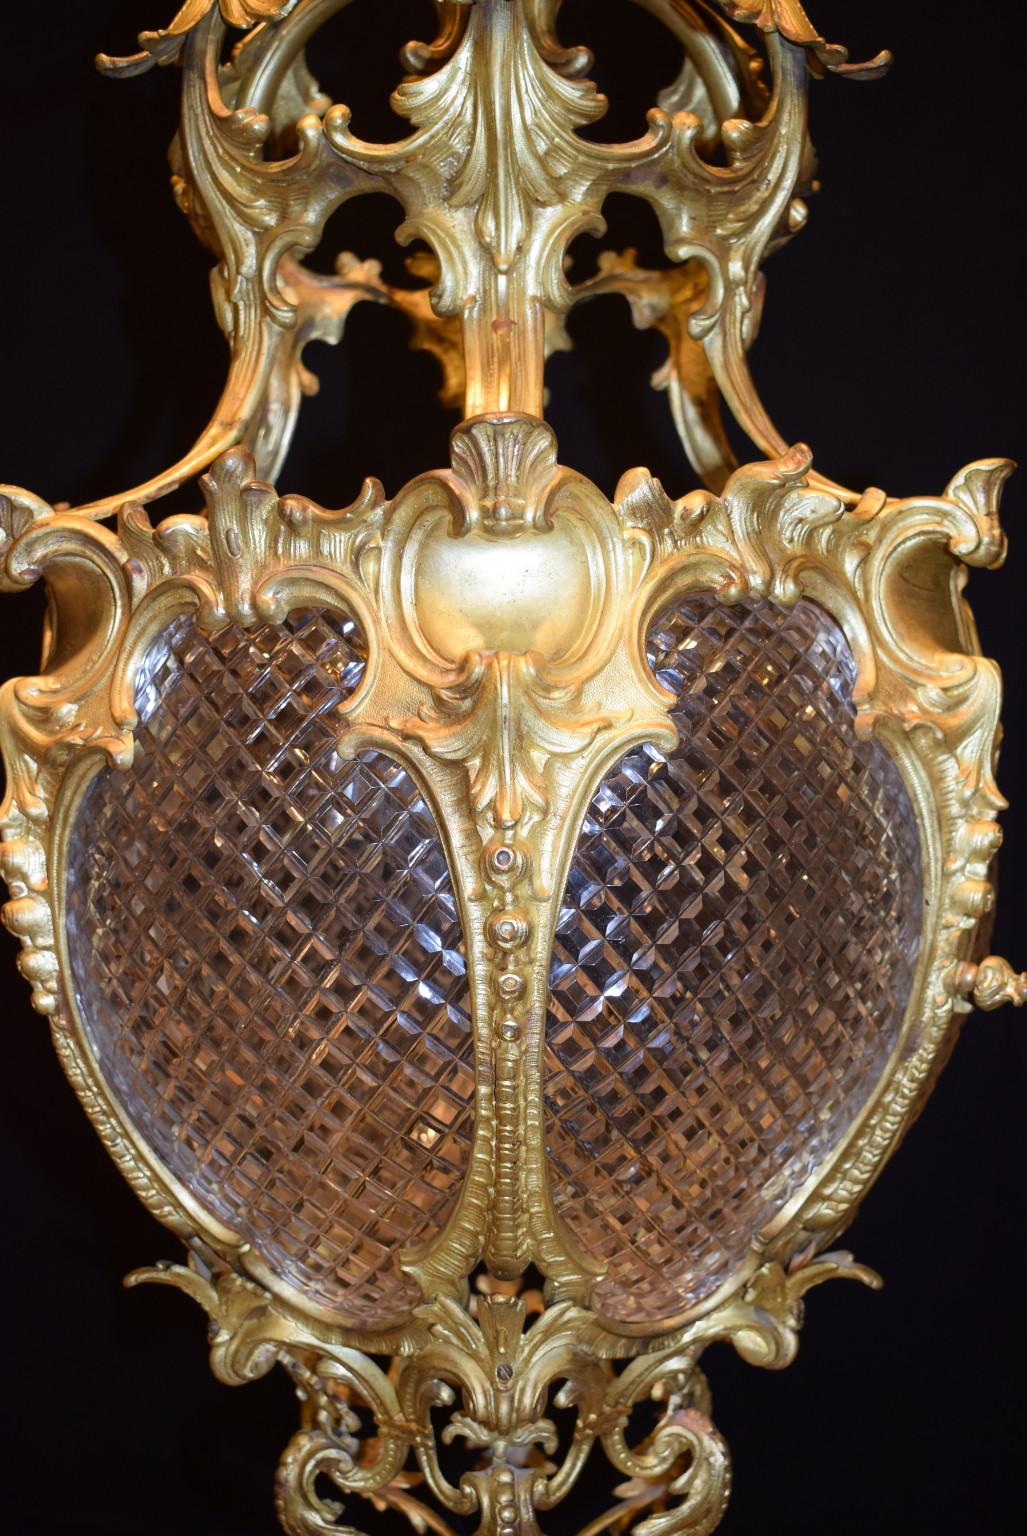 Magnificent gilt bronze lantern with hand cut crystal panels.
CW4498